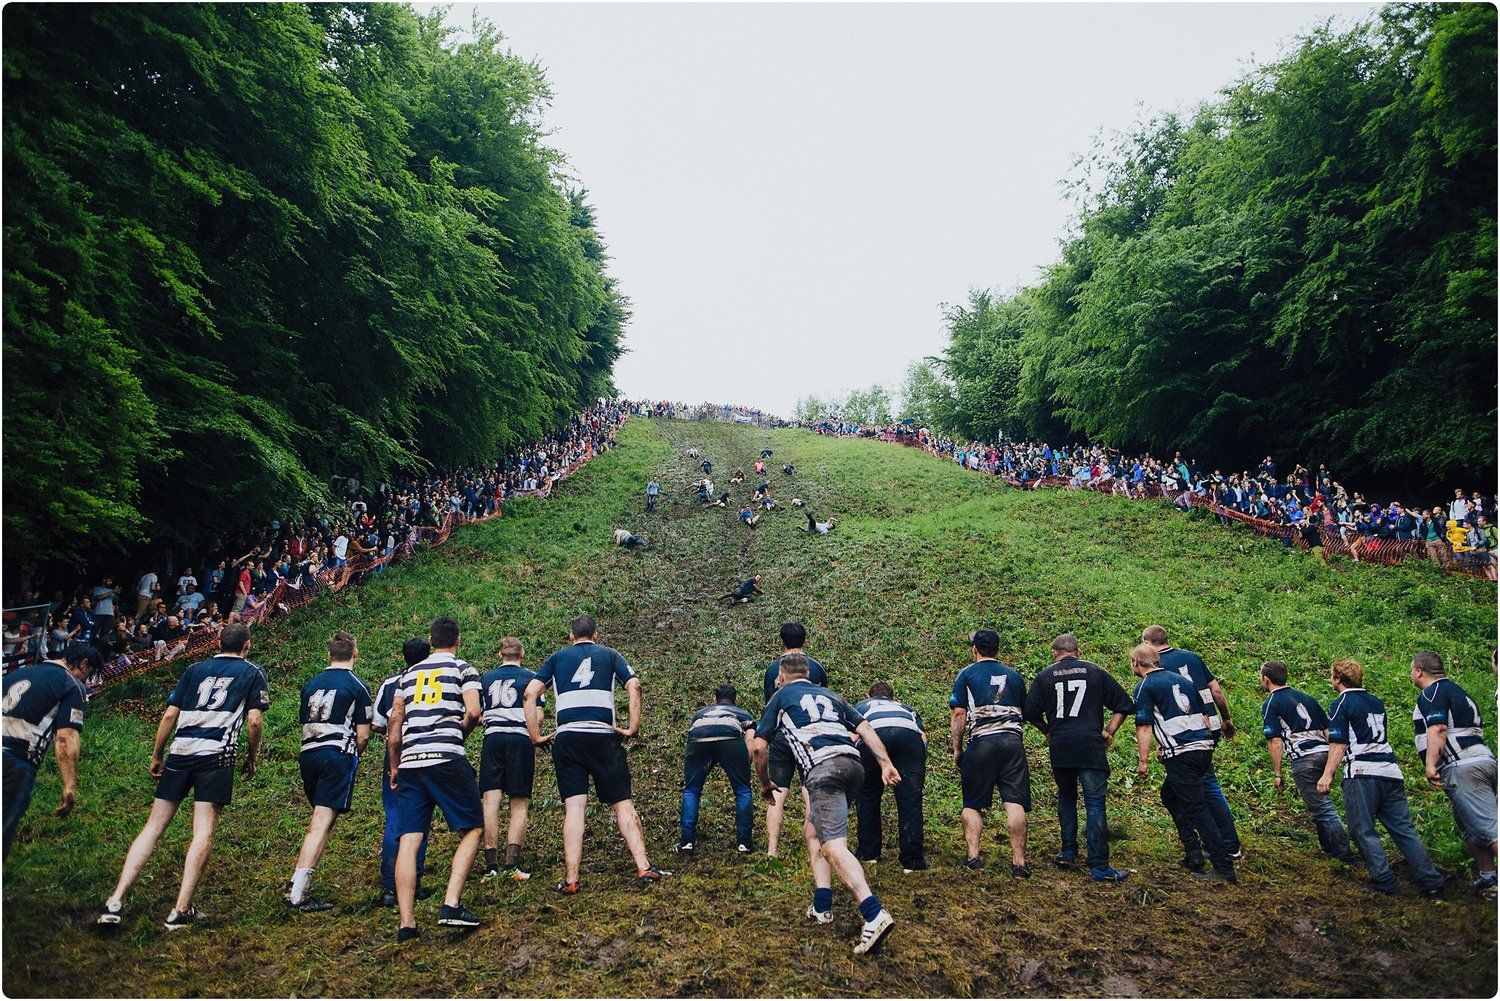 Cheese Rolling 2018 La Course Au Fromage Revient Le 28 Mai Openminded